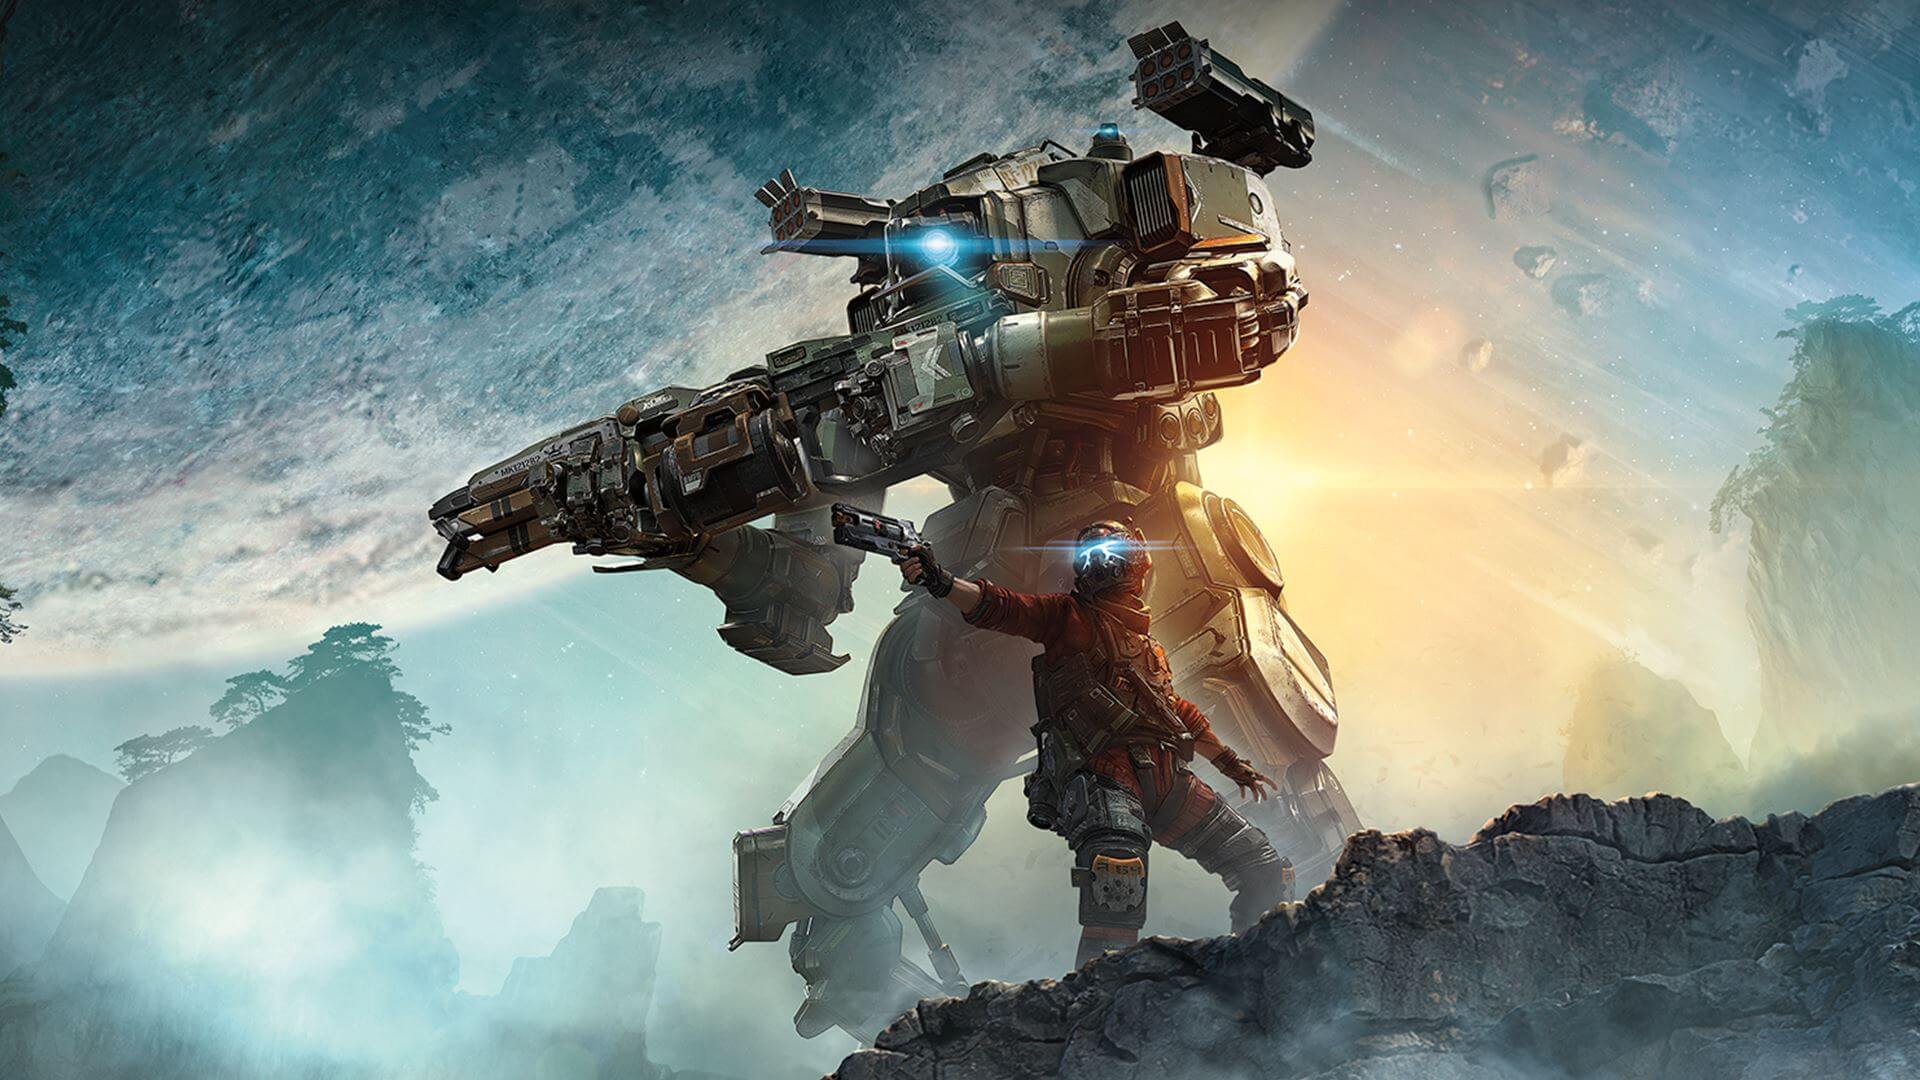 Titanfall 2 Game Review 